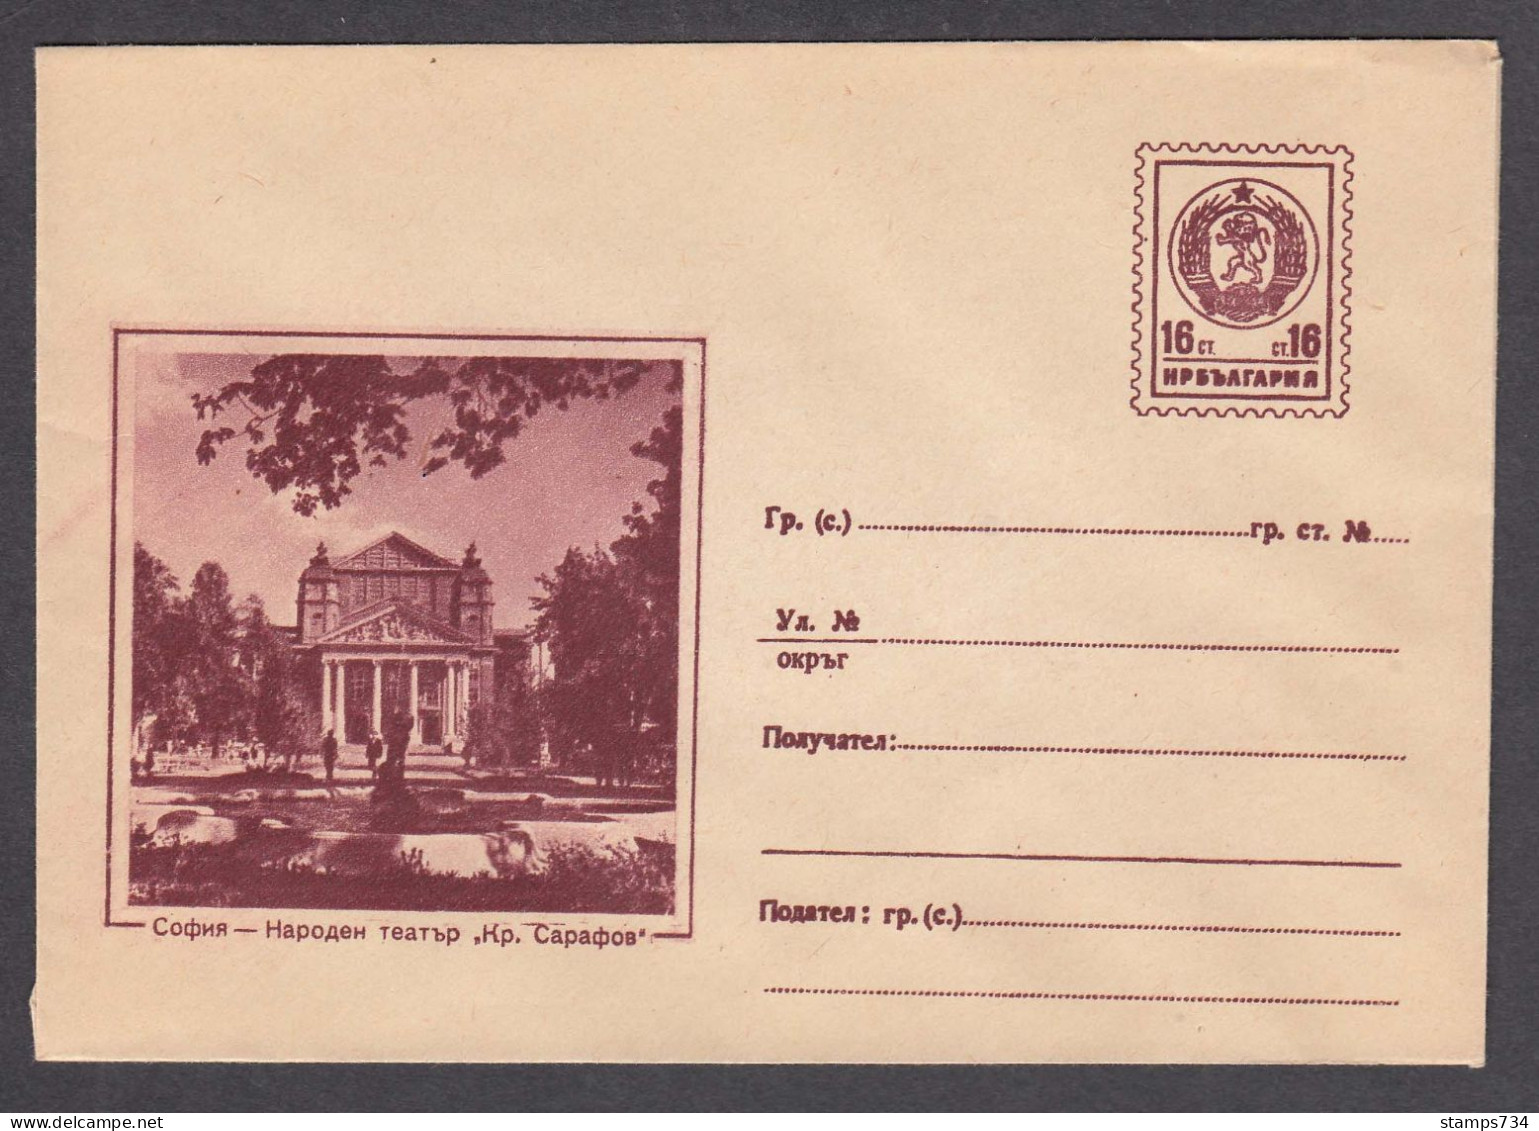 PS 232/1960 - Mint, Sofia - National Theater "Kr. Sarafov", Post. Stationery - Bulgaria - Covers